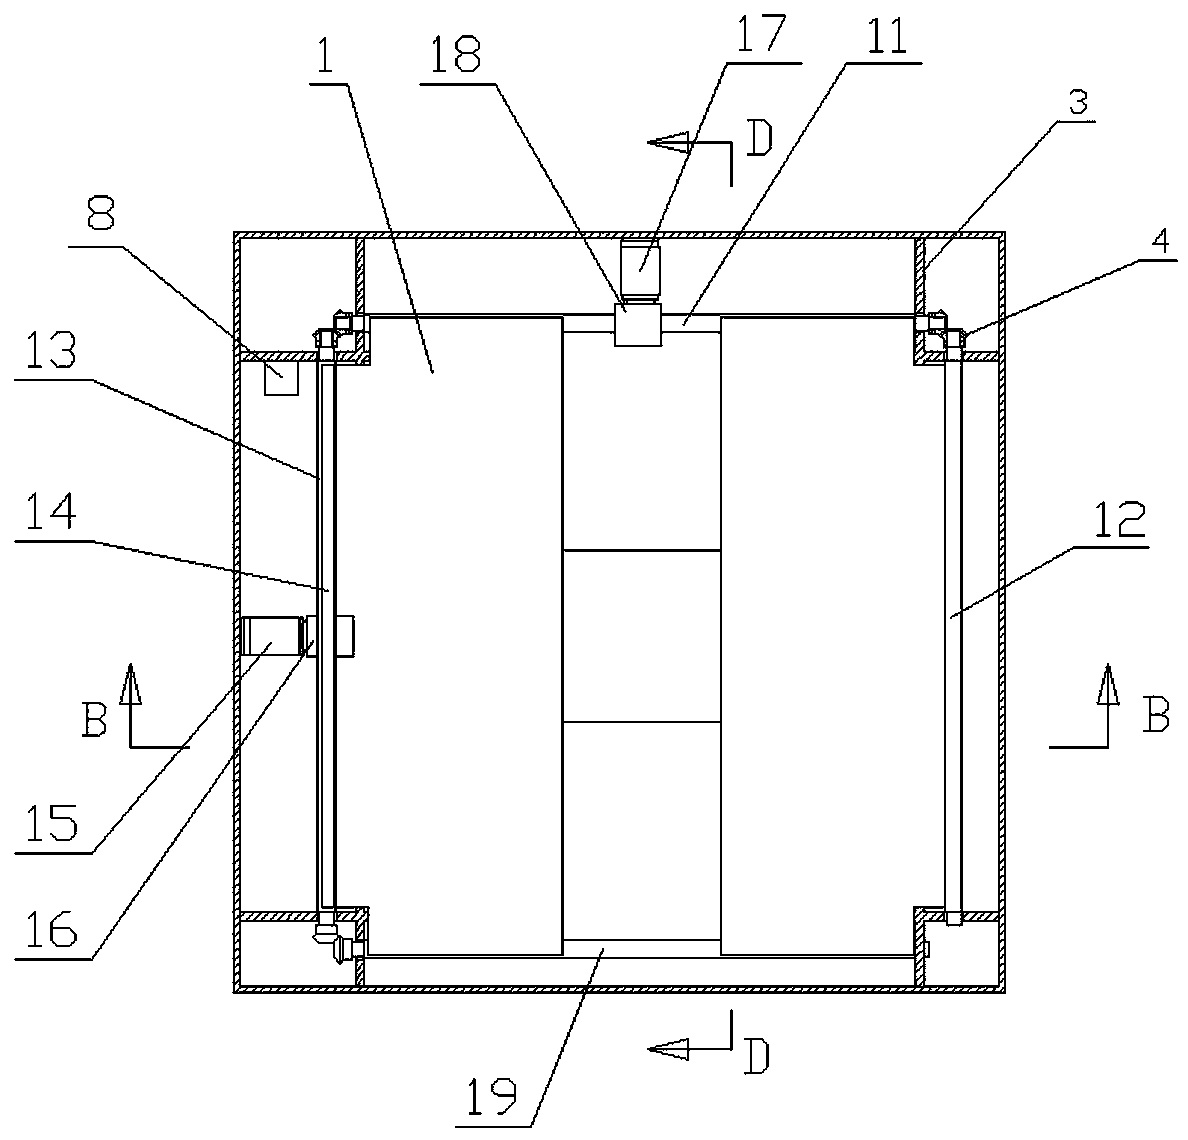 Overturning-type safety protective fence for wireless charging transmitter of electric vehicle